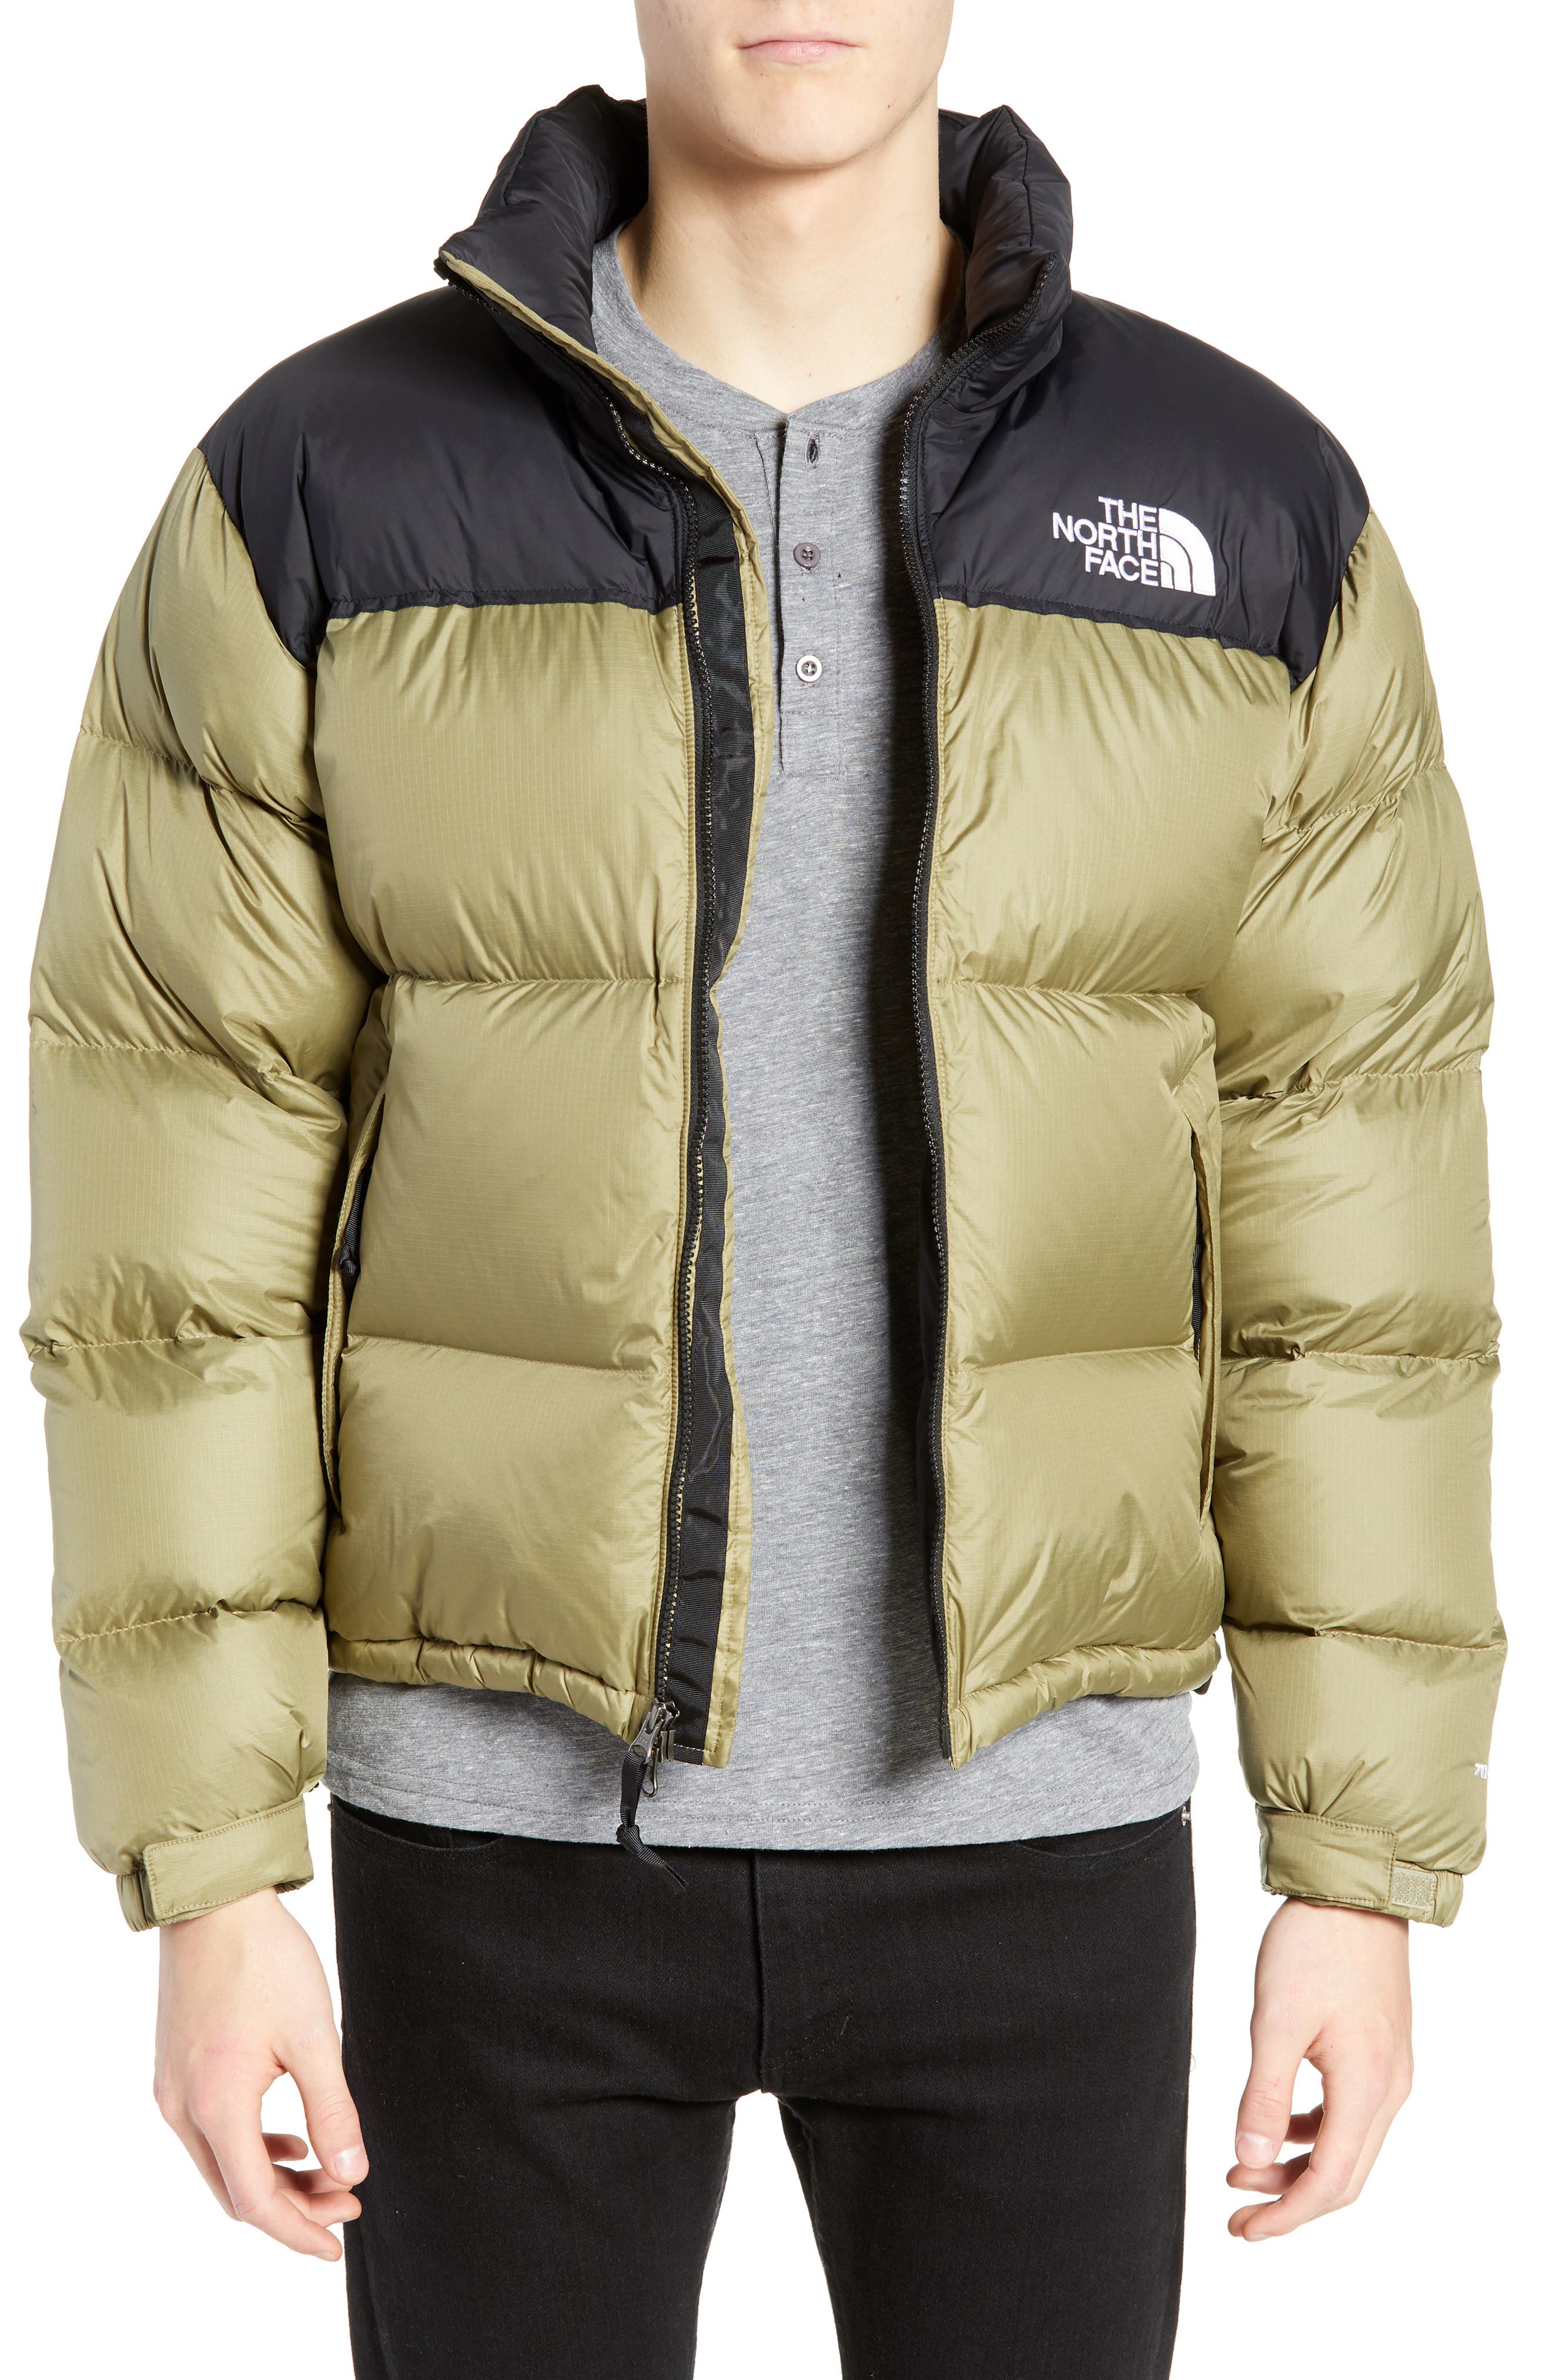 north face glow in the dark jacket